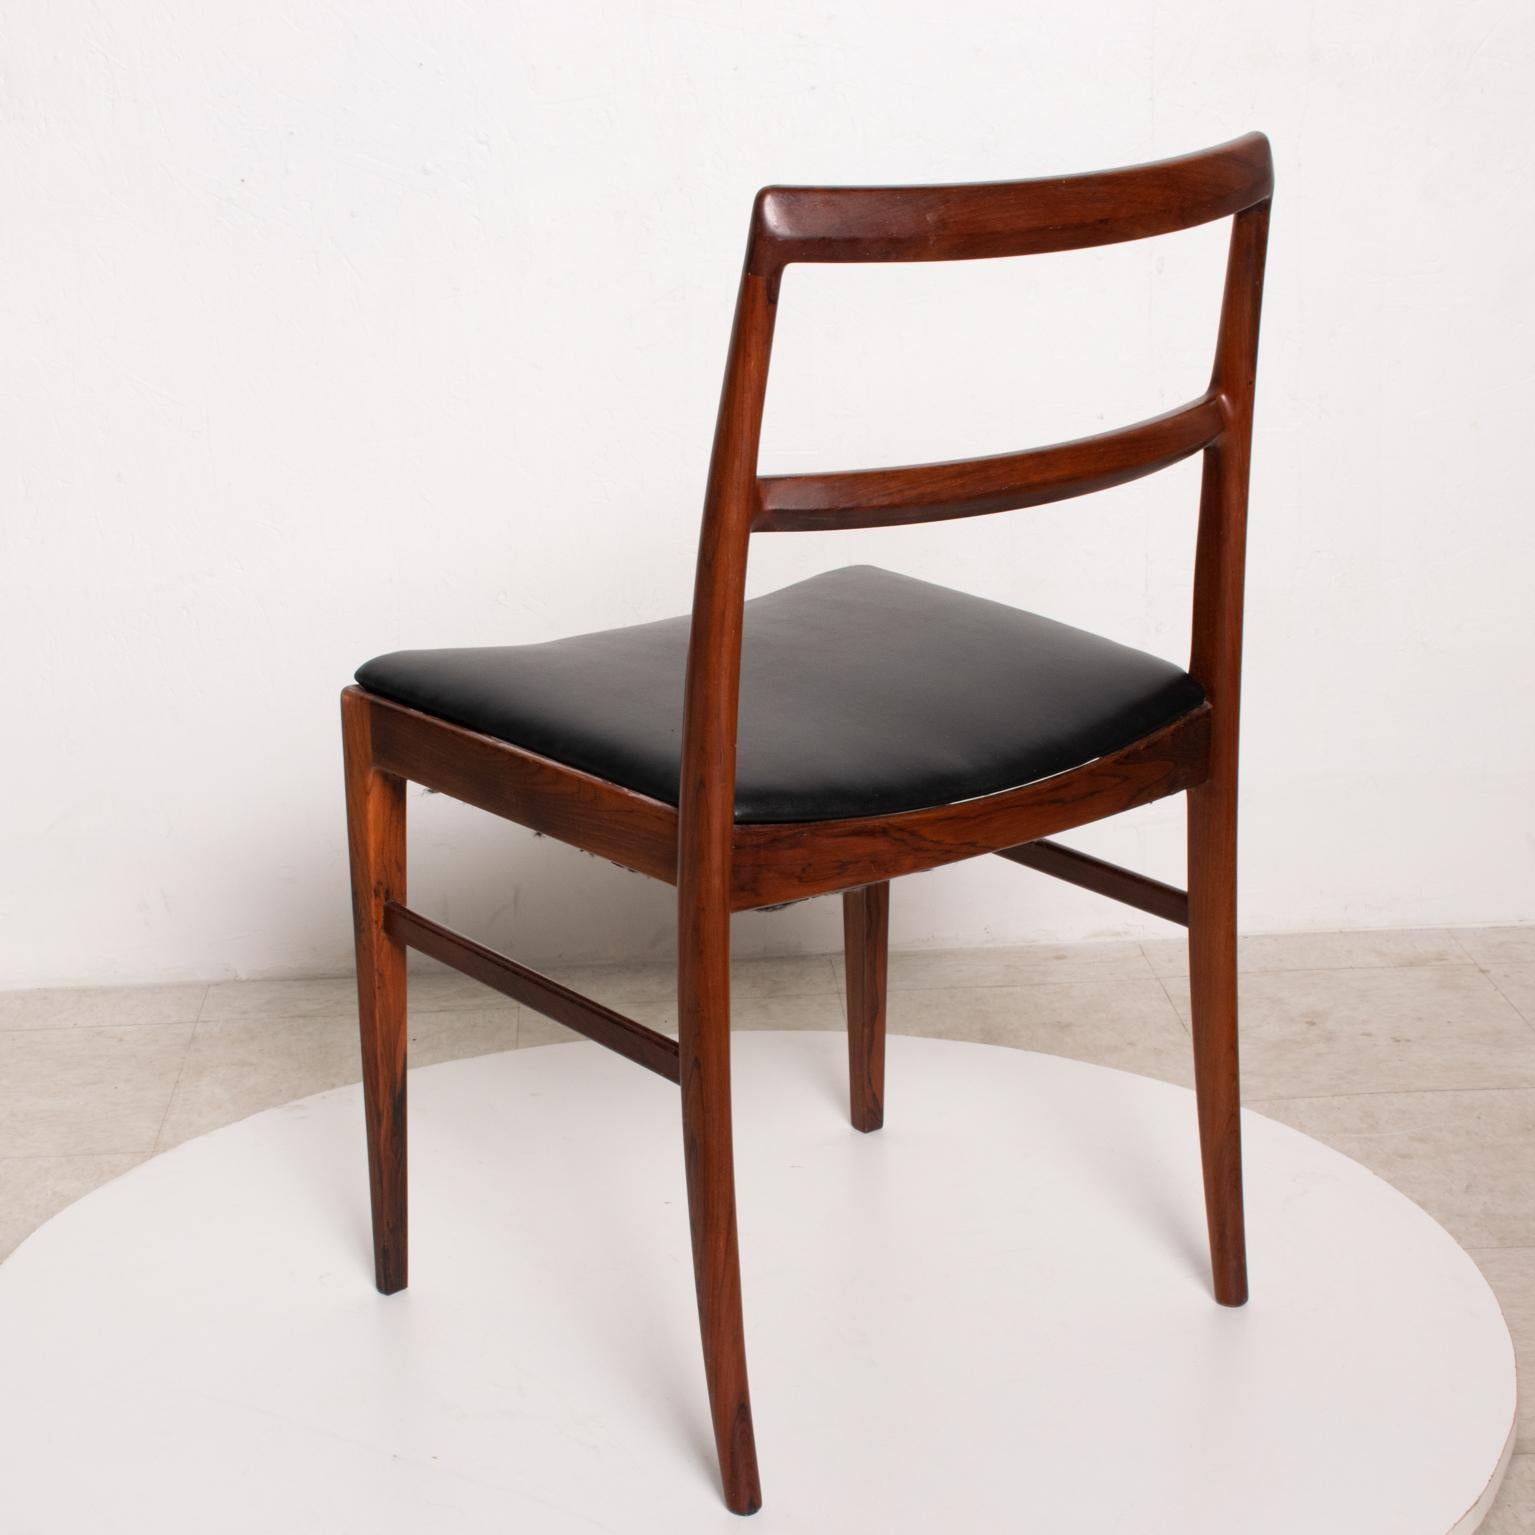 Mid-20th Century Midcentury Danish Modern Set of 6 Dining Chairs by Arne Vodder for Sibast 430